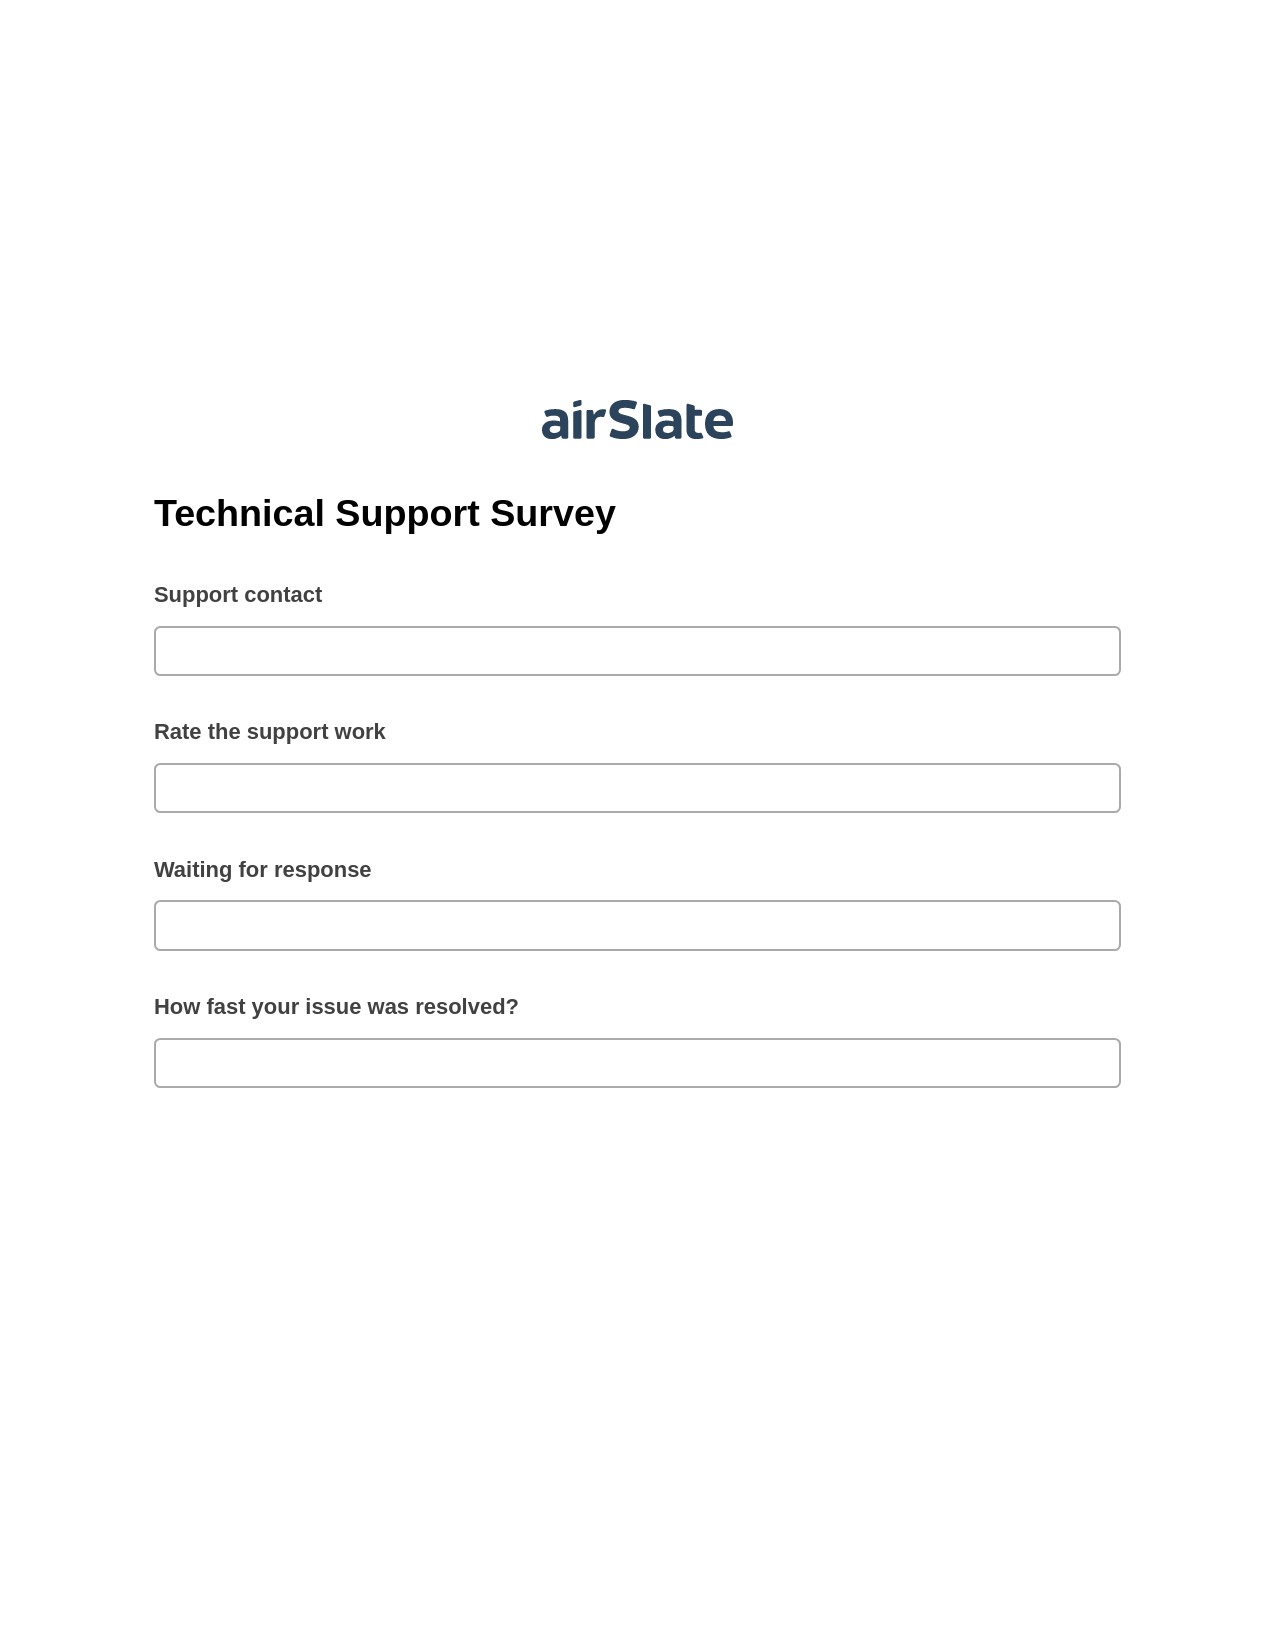 Technical Support Survey Pre-fill Document Bot, Jira Bot, Export to NetSuite Bot